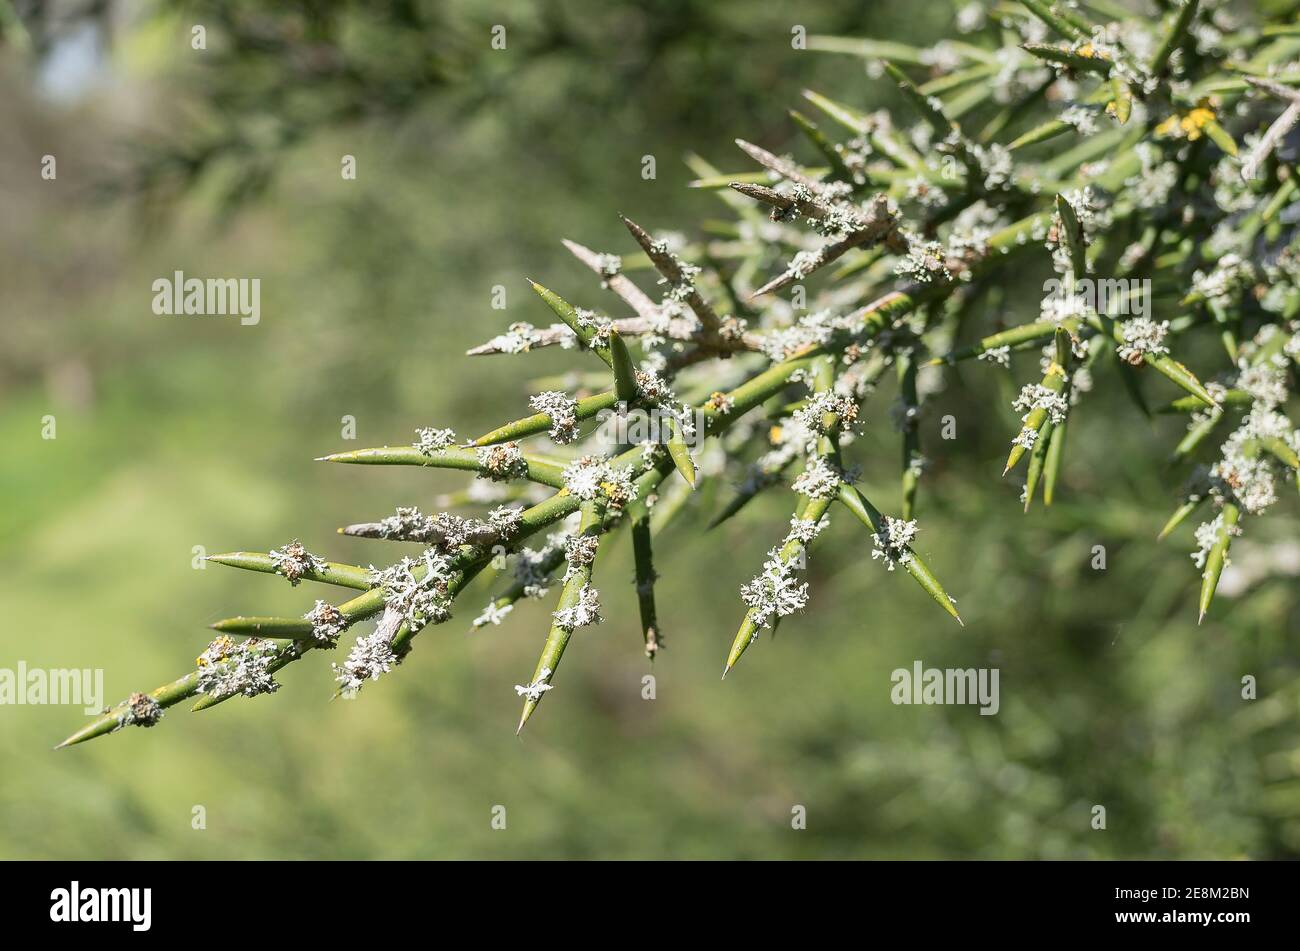 Unusual spiny shrub Colletia Hysterix Rosea showing lon cylindrical thorns covered in lichens indicating air purity in an English garden Stock Photo